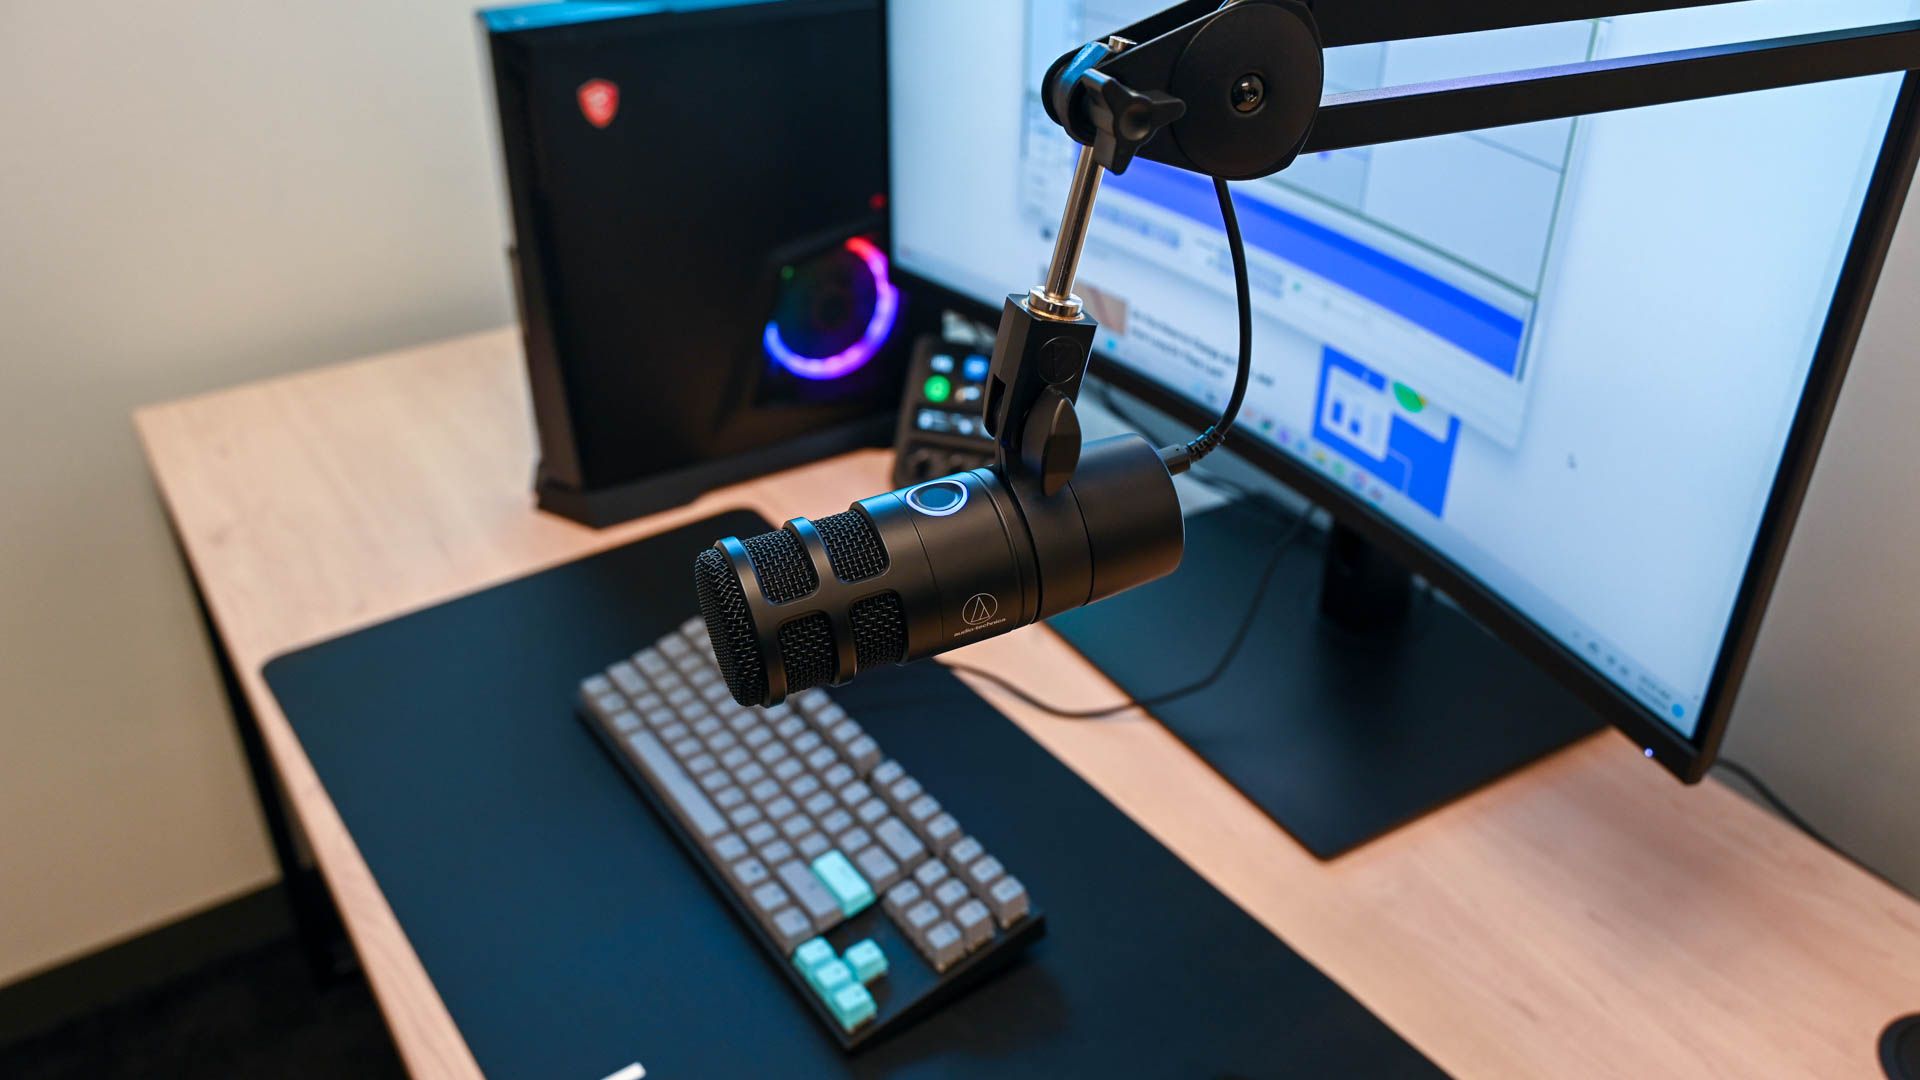 The Audio-Technica AT2040USB Microphone set up at a desk using a boom arm